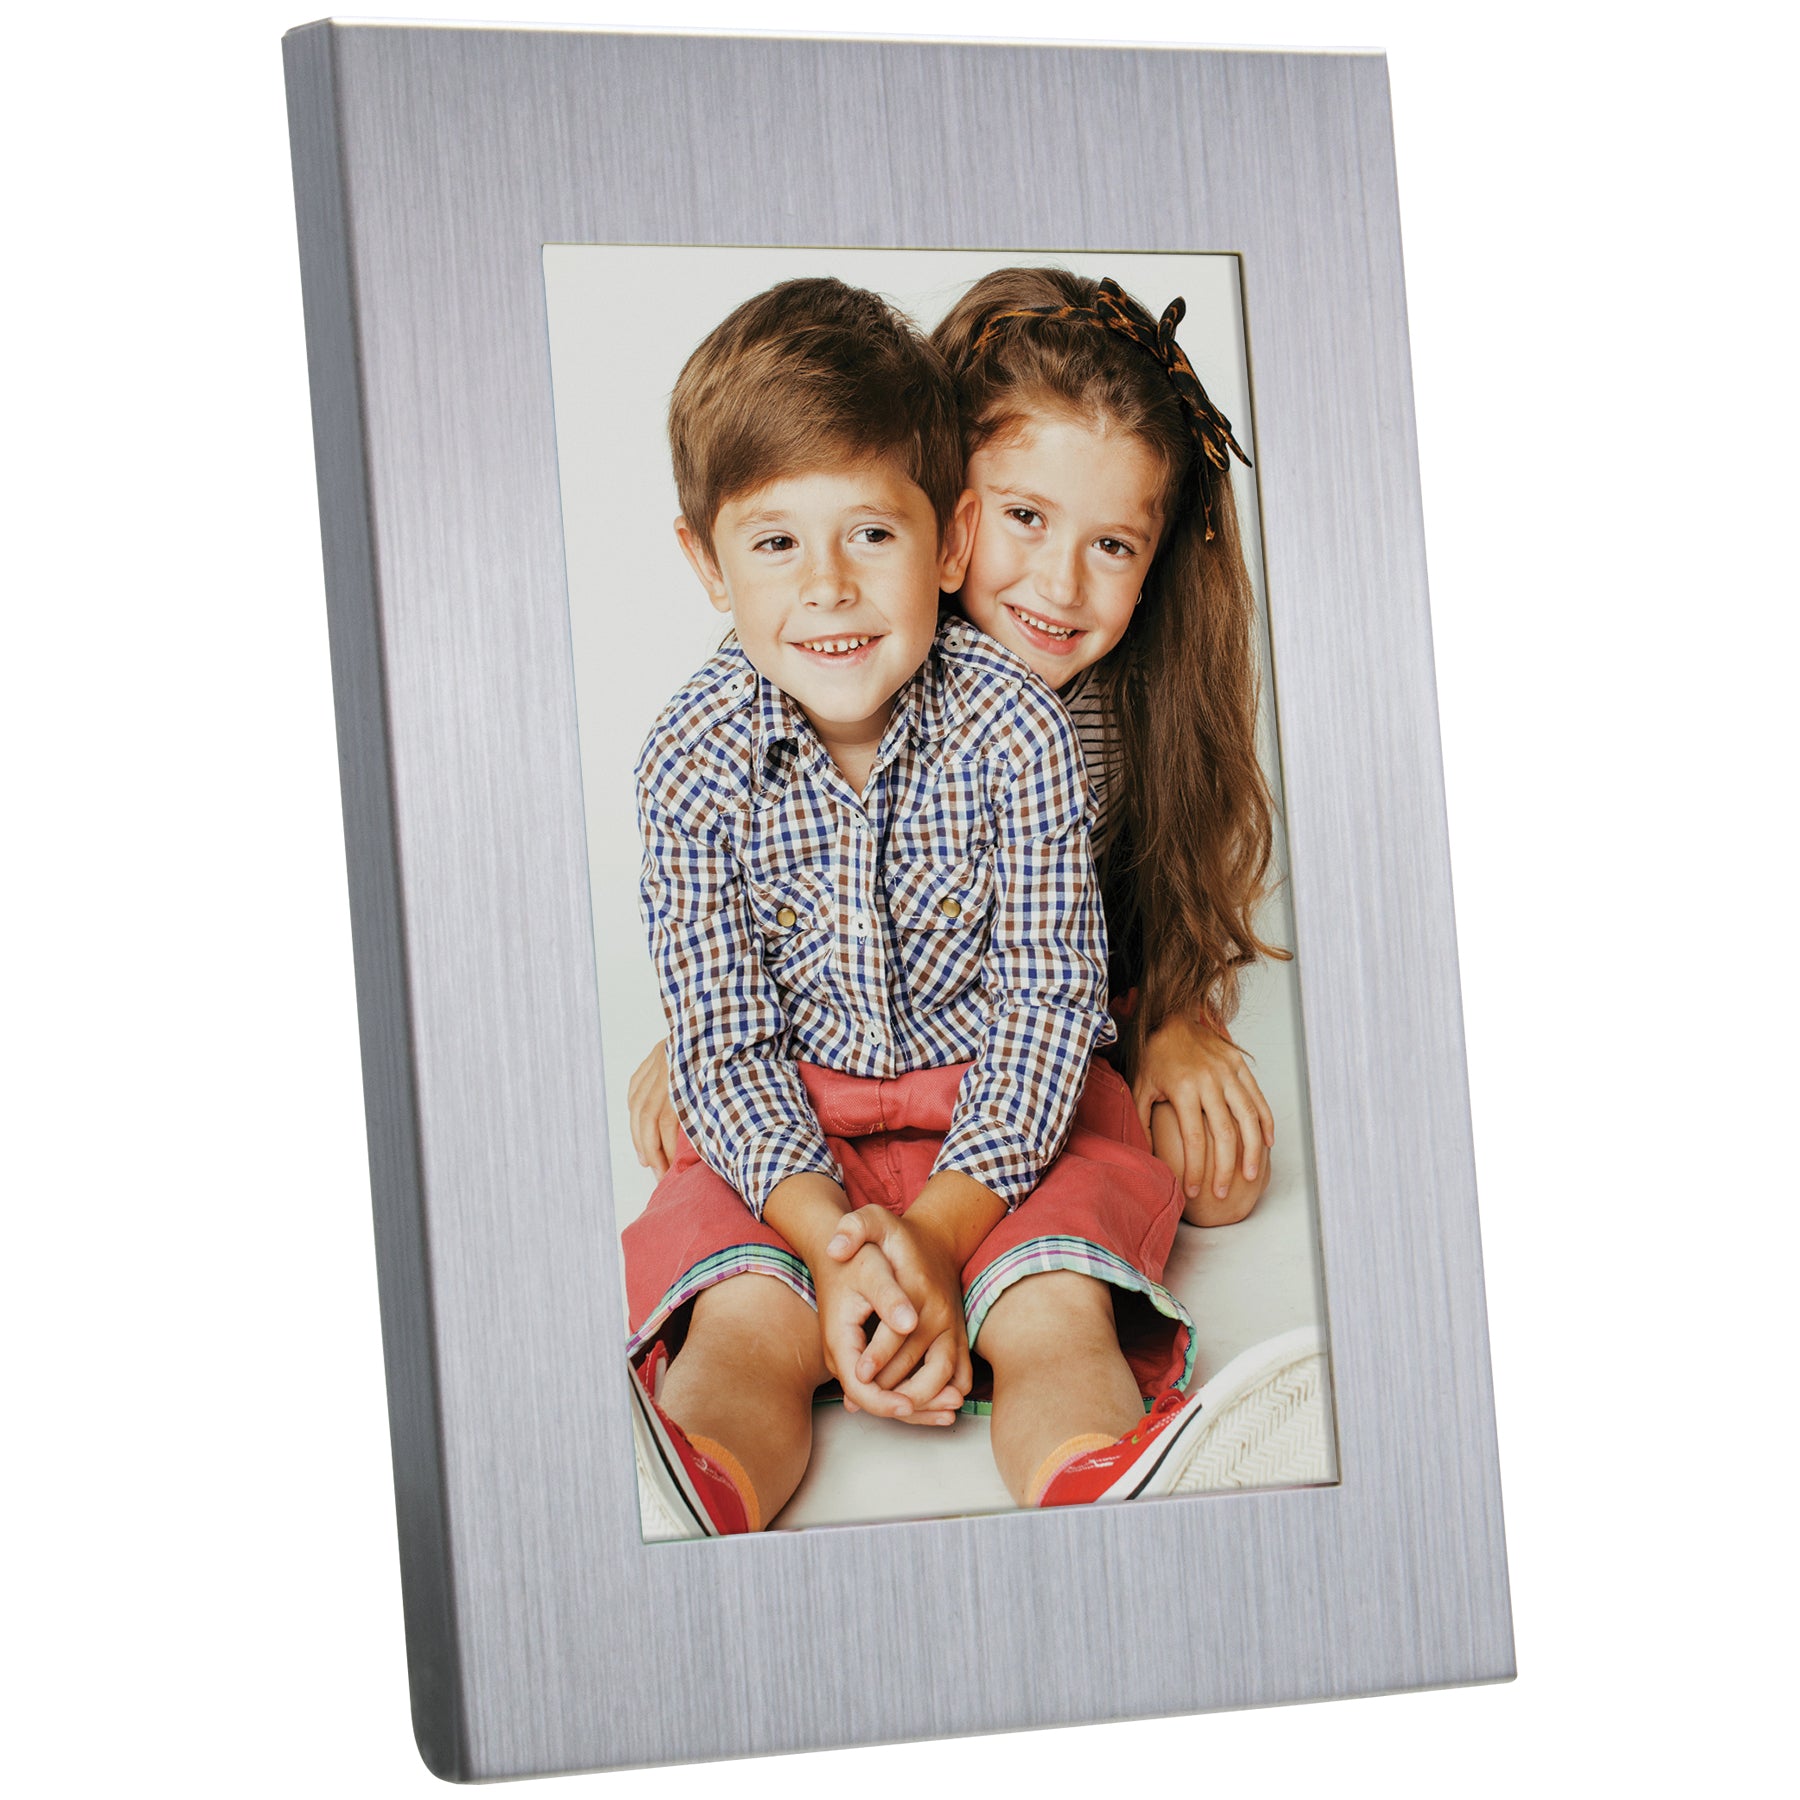 2-3/8” x 3-1/2” Silver Picture Frame